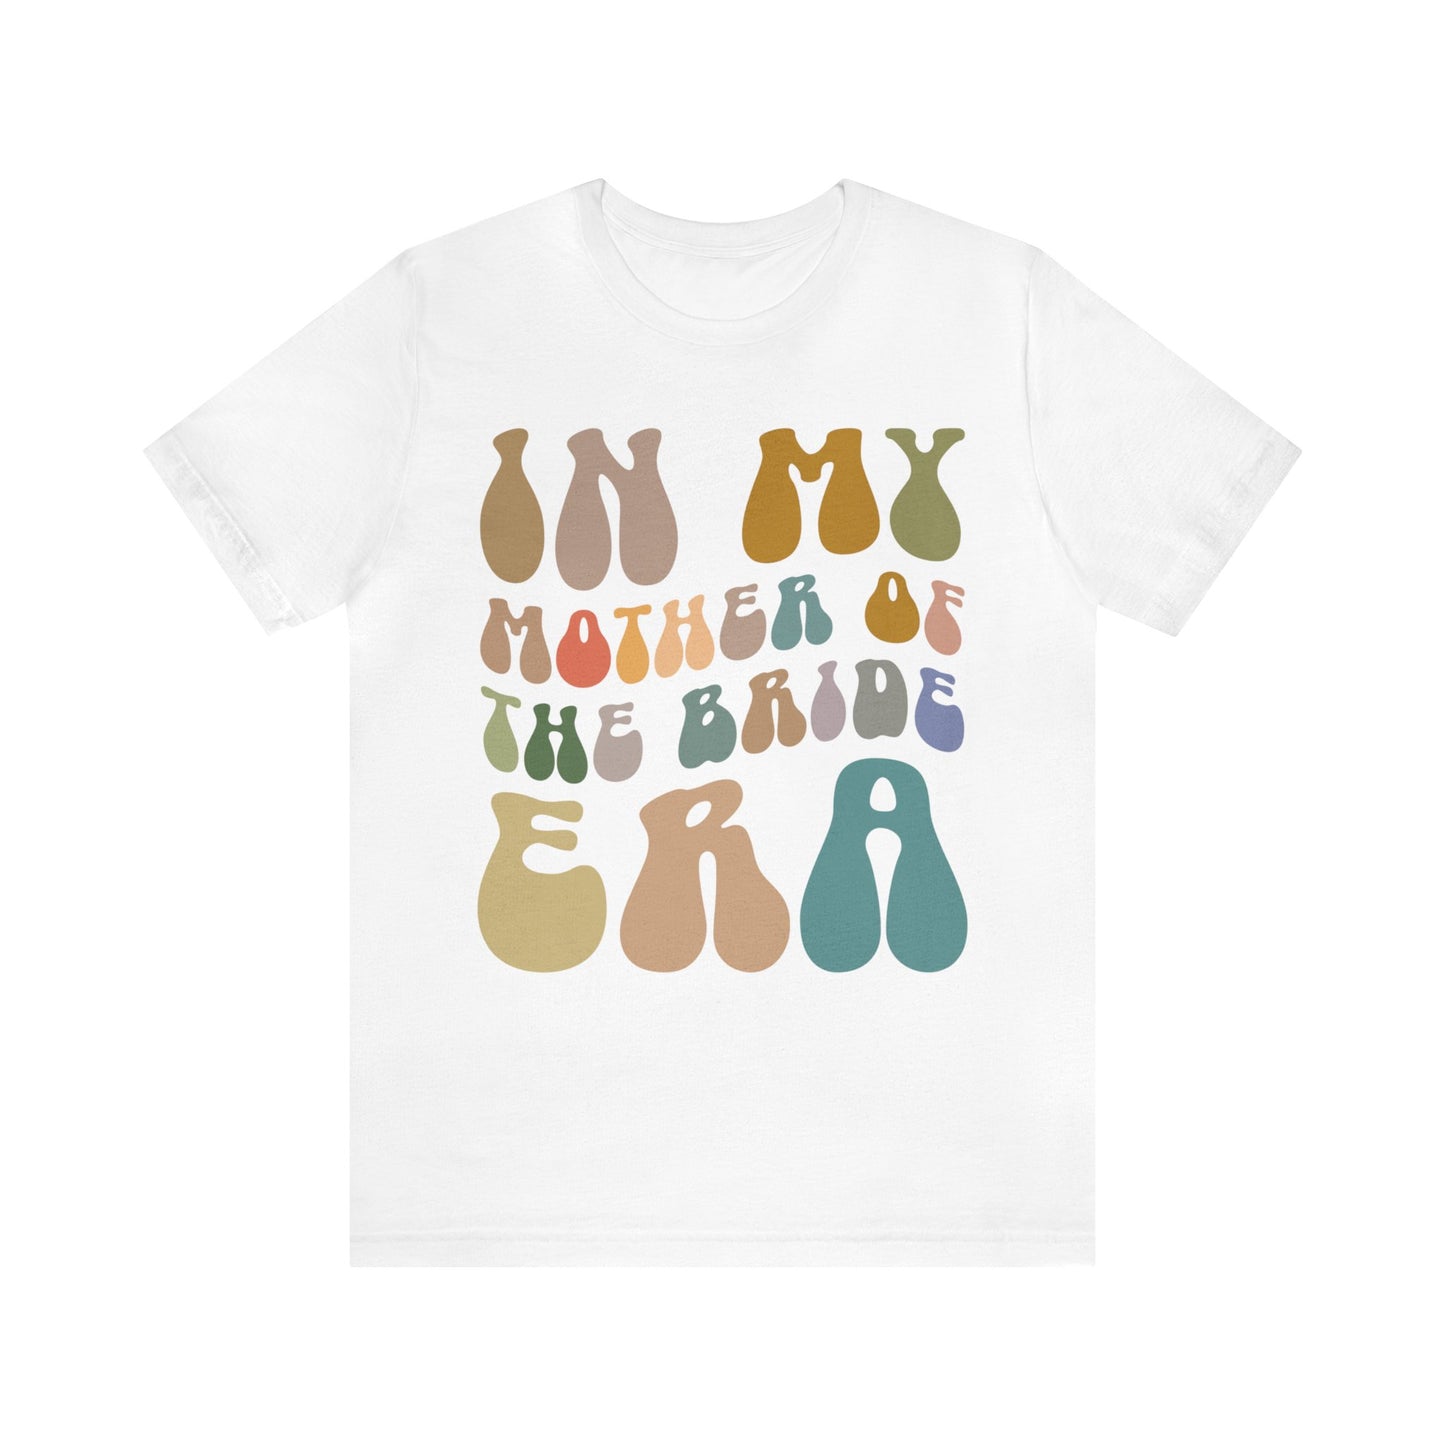 In My Mother of the Bride Era Shirt, Bridal Party Shirt for Mom, Retro Wedding Shirt for Mom, Engagement Shirt, Cute Wedding Gift, T1349